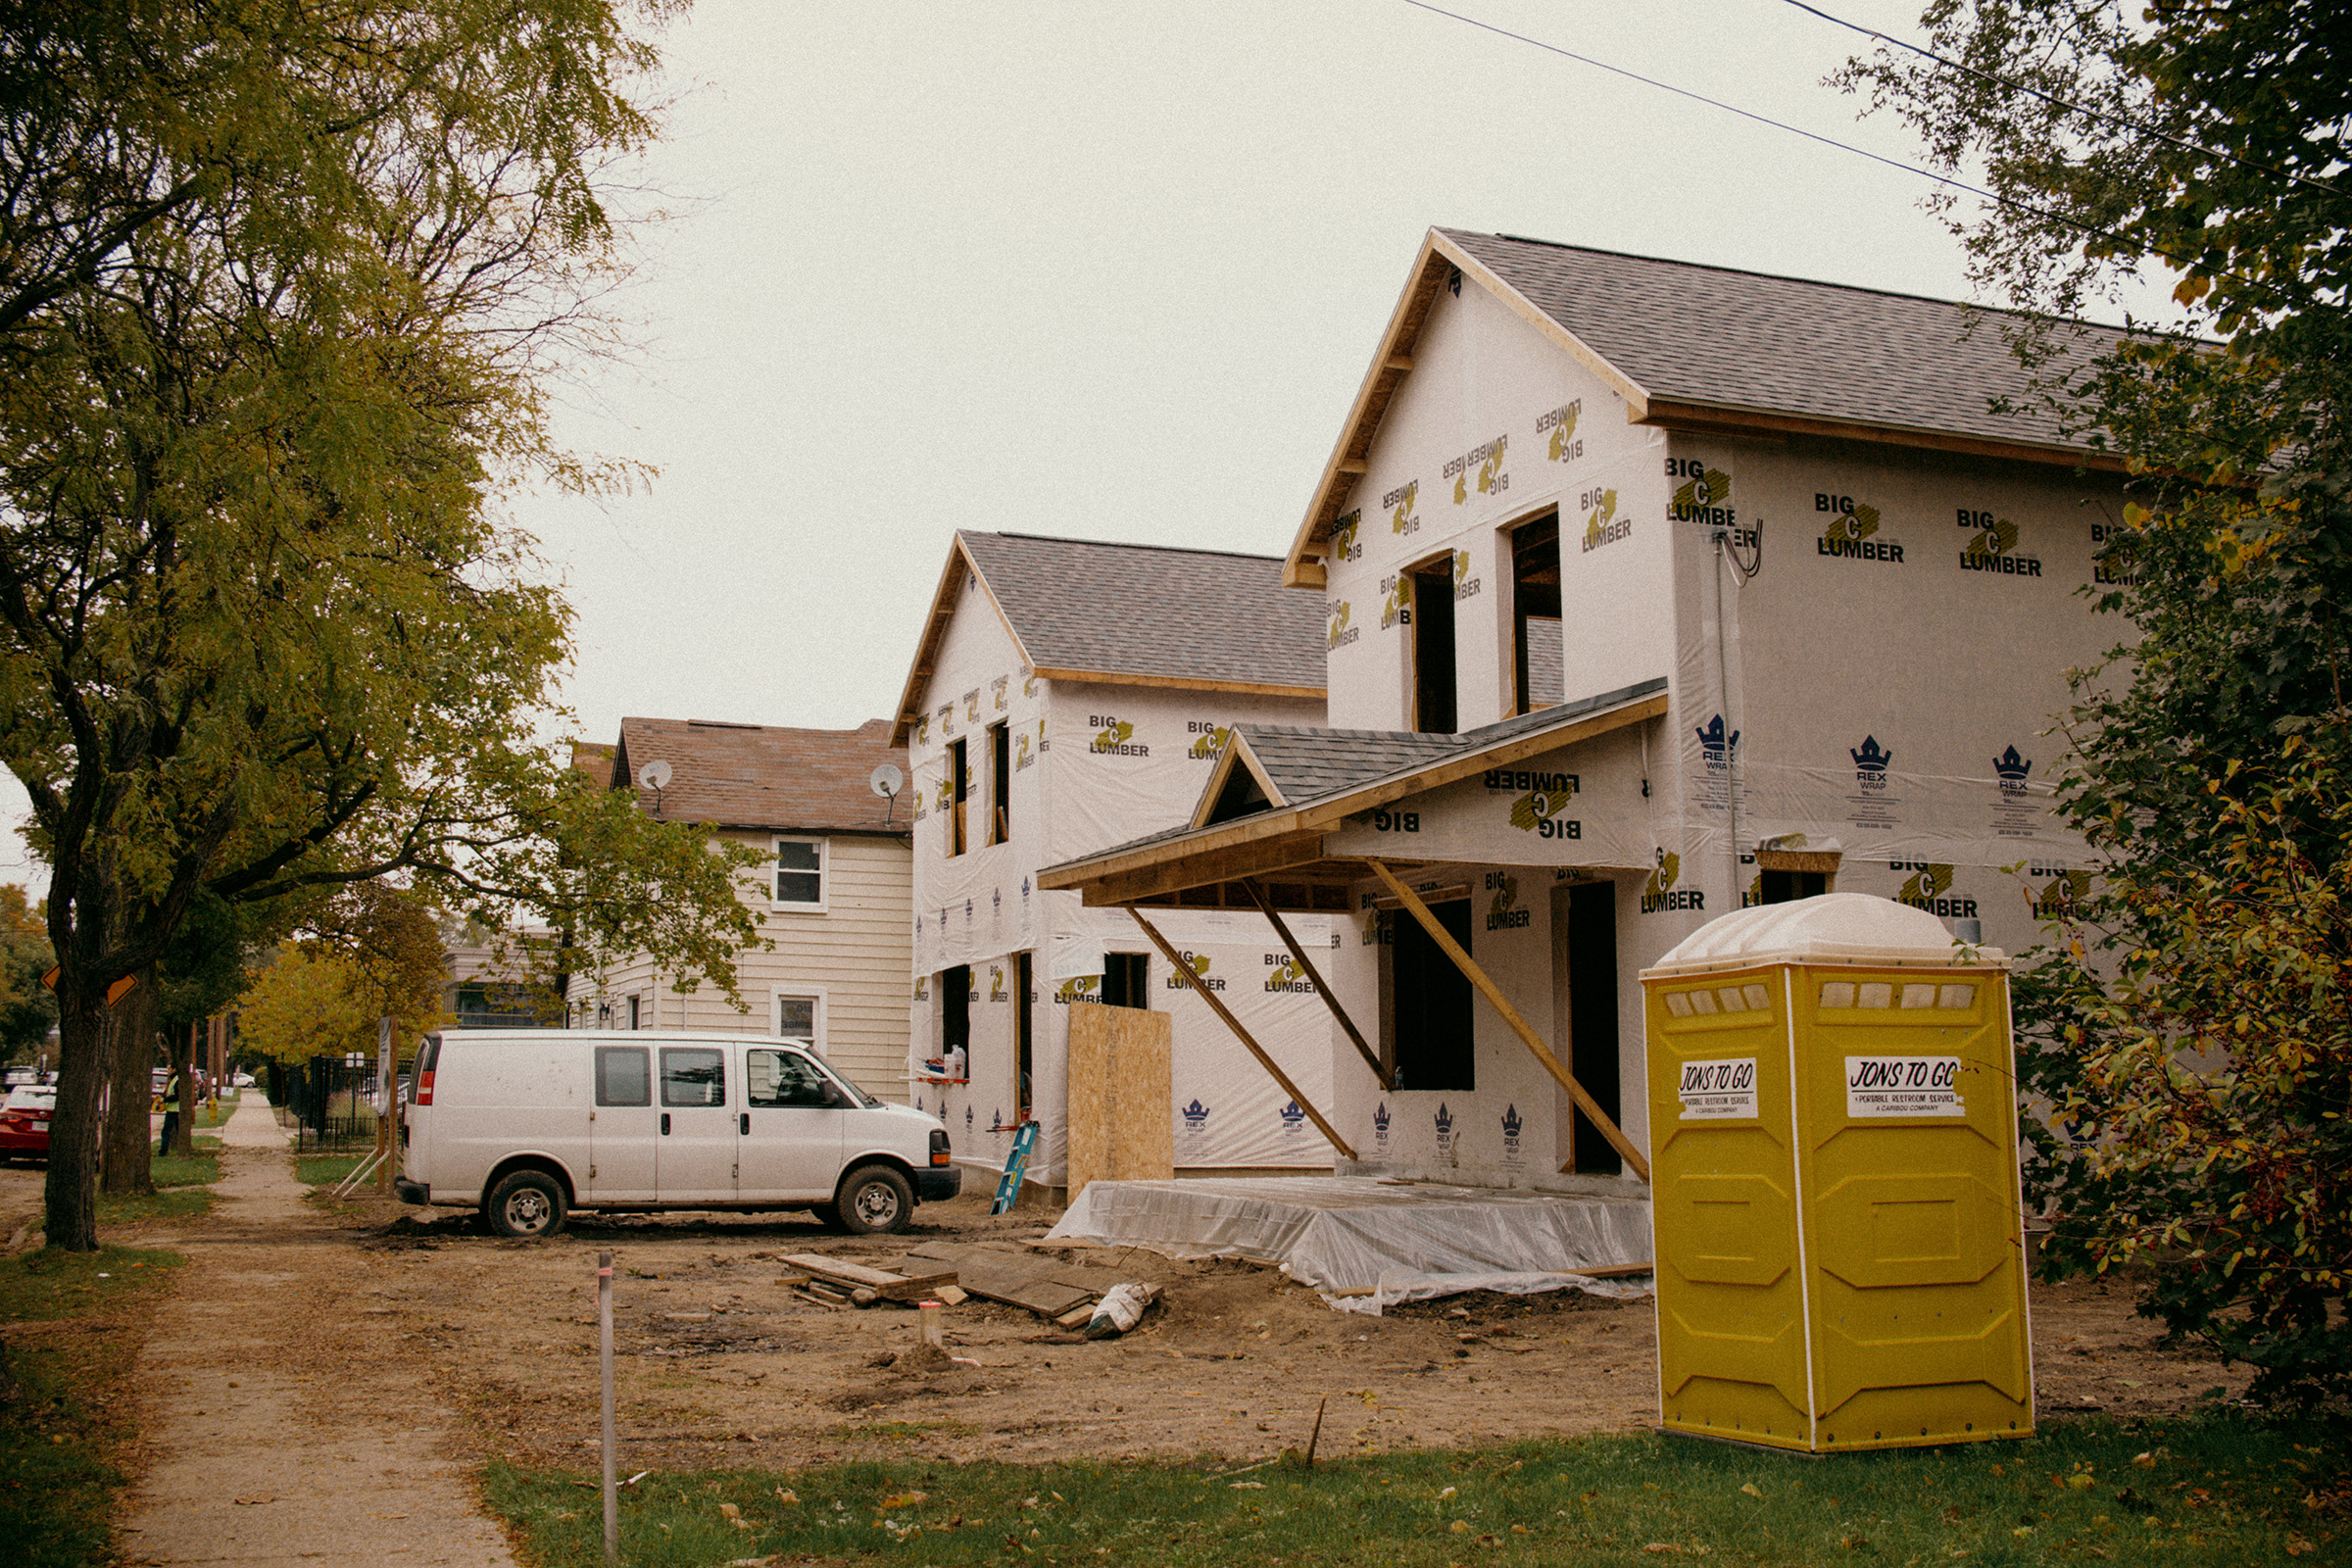 New affordable housing under construction in the Northside neighborhood of Kalamazoo, a project receiving funding from the Foundation for Excellence. (Akilah Townsend for TIME)